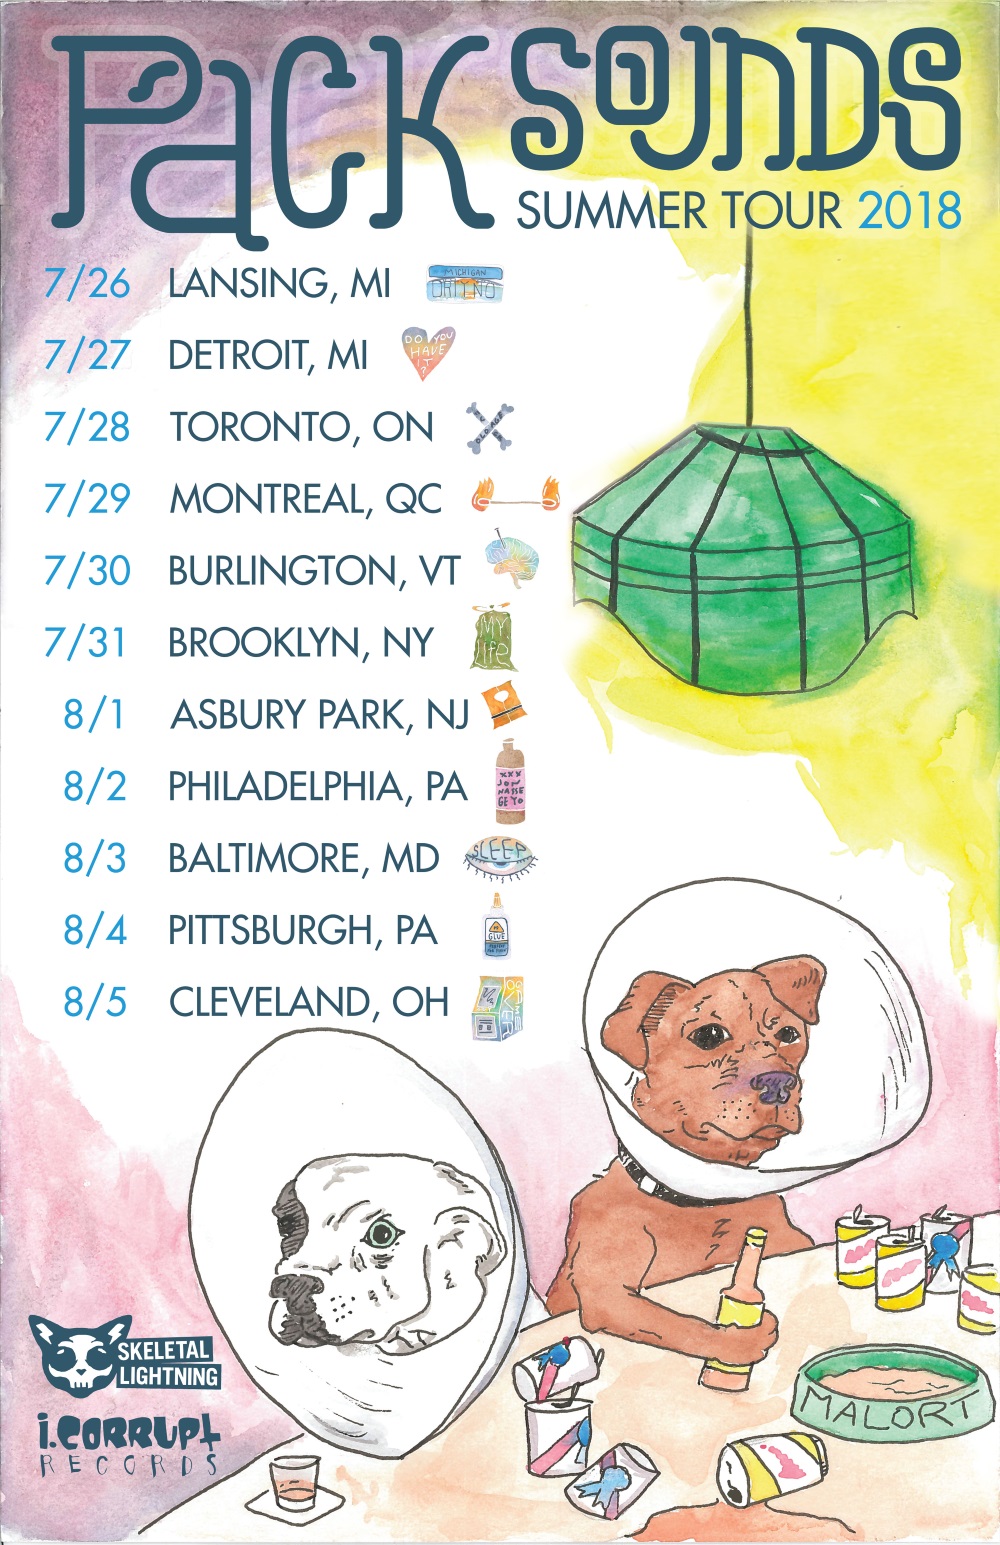 PACK SOUNDS tour poster, by Nick Yonce